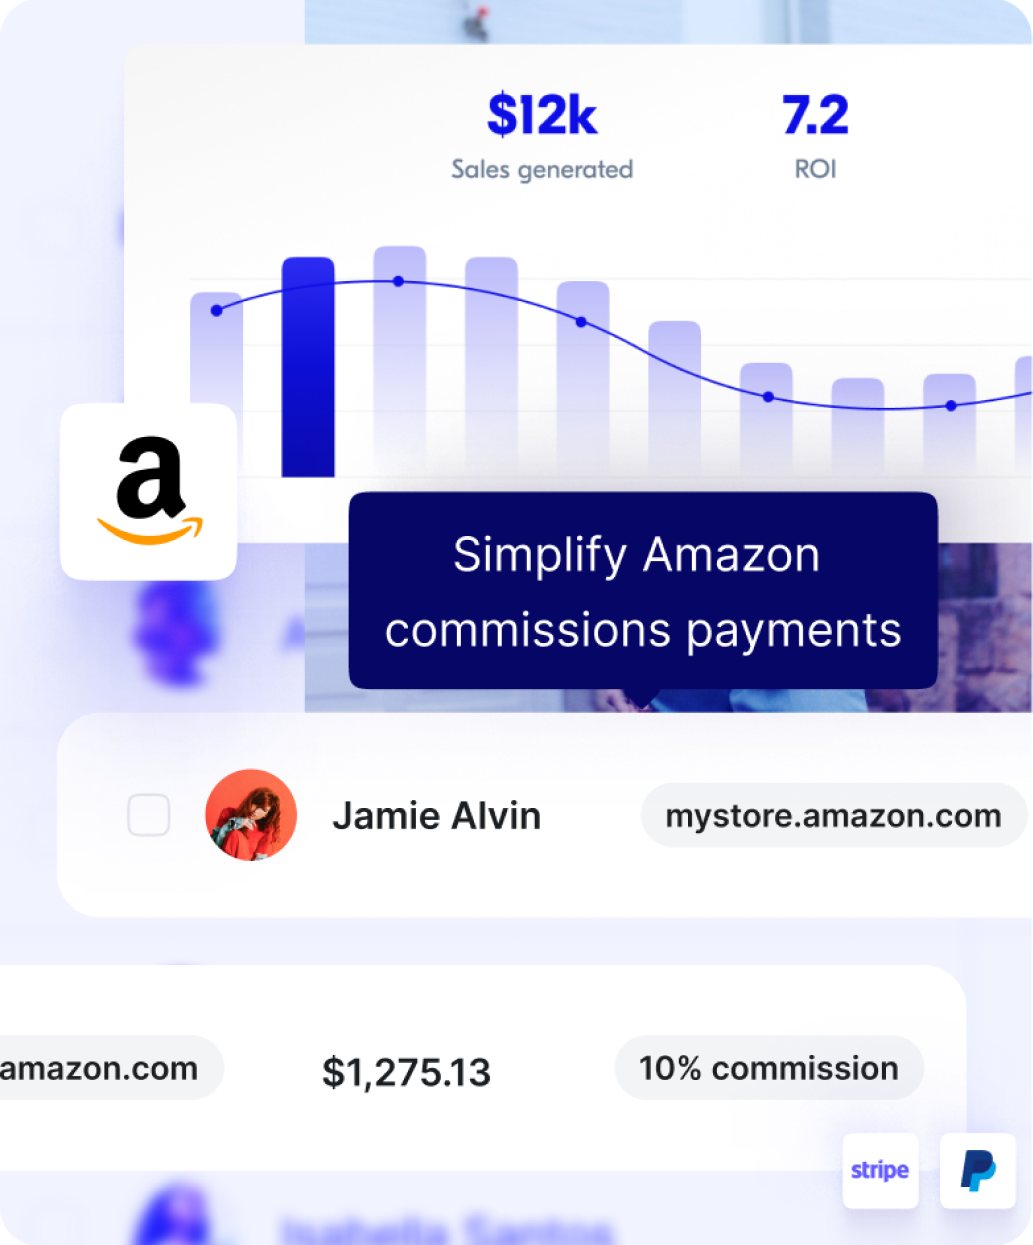 Pay influencers their commission from the Amazon Sales directly within Upfluence